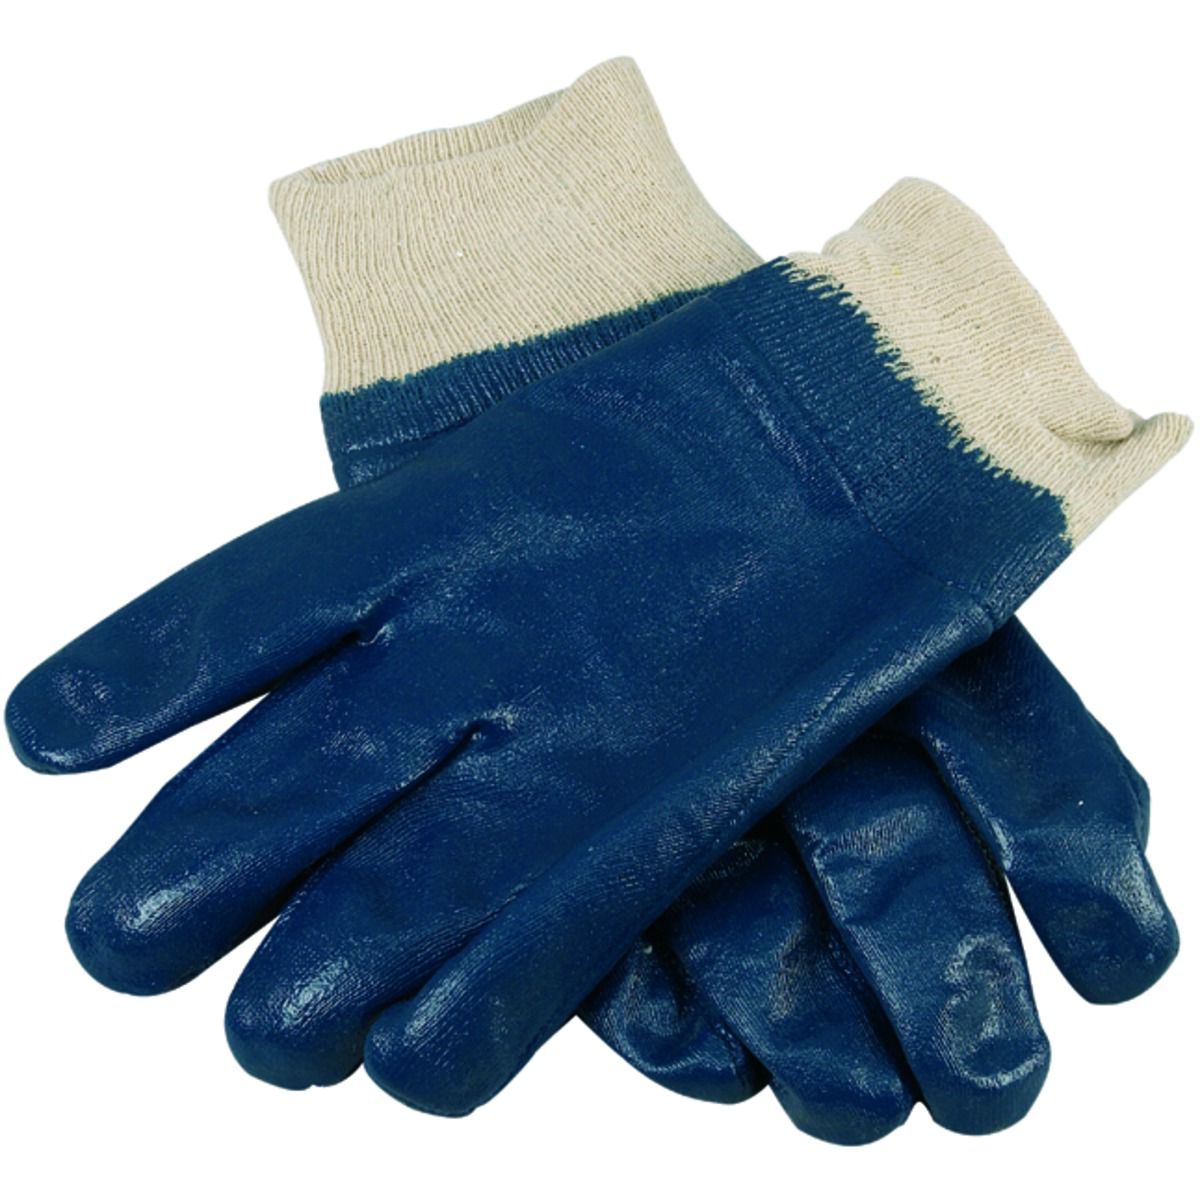 Image of Wickes Blue Nitrile/Chemical Gloves - L